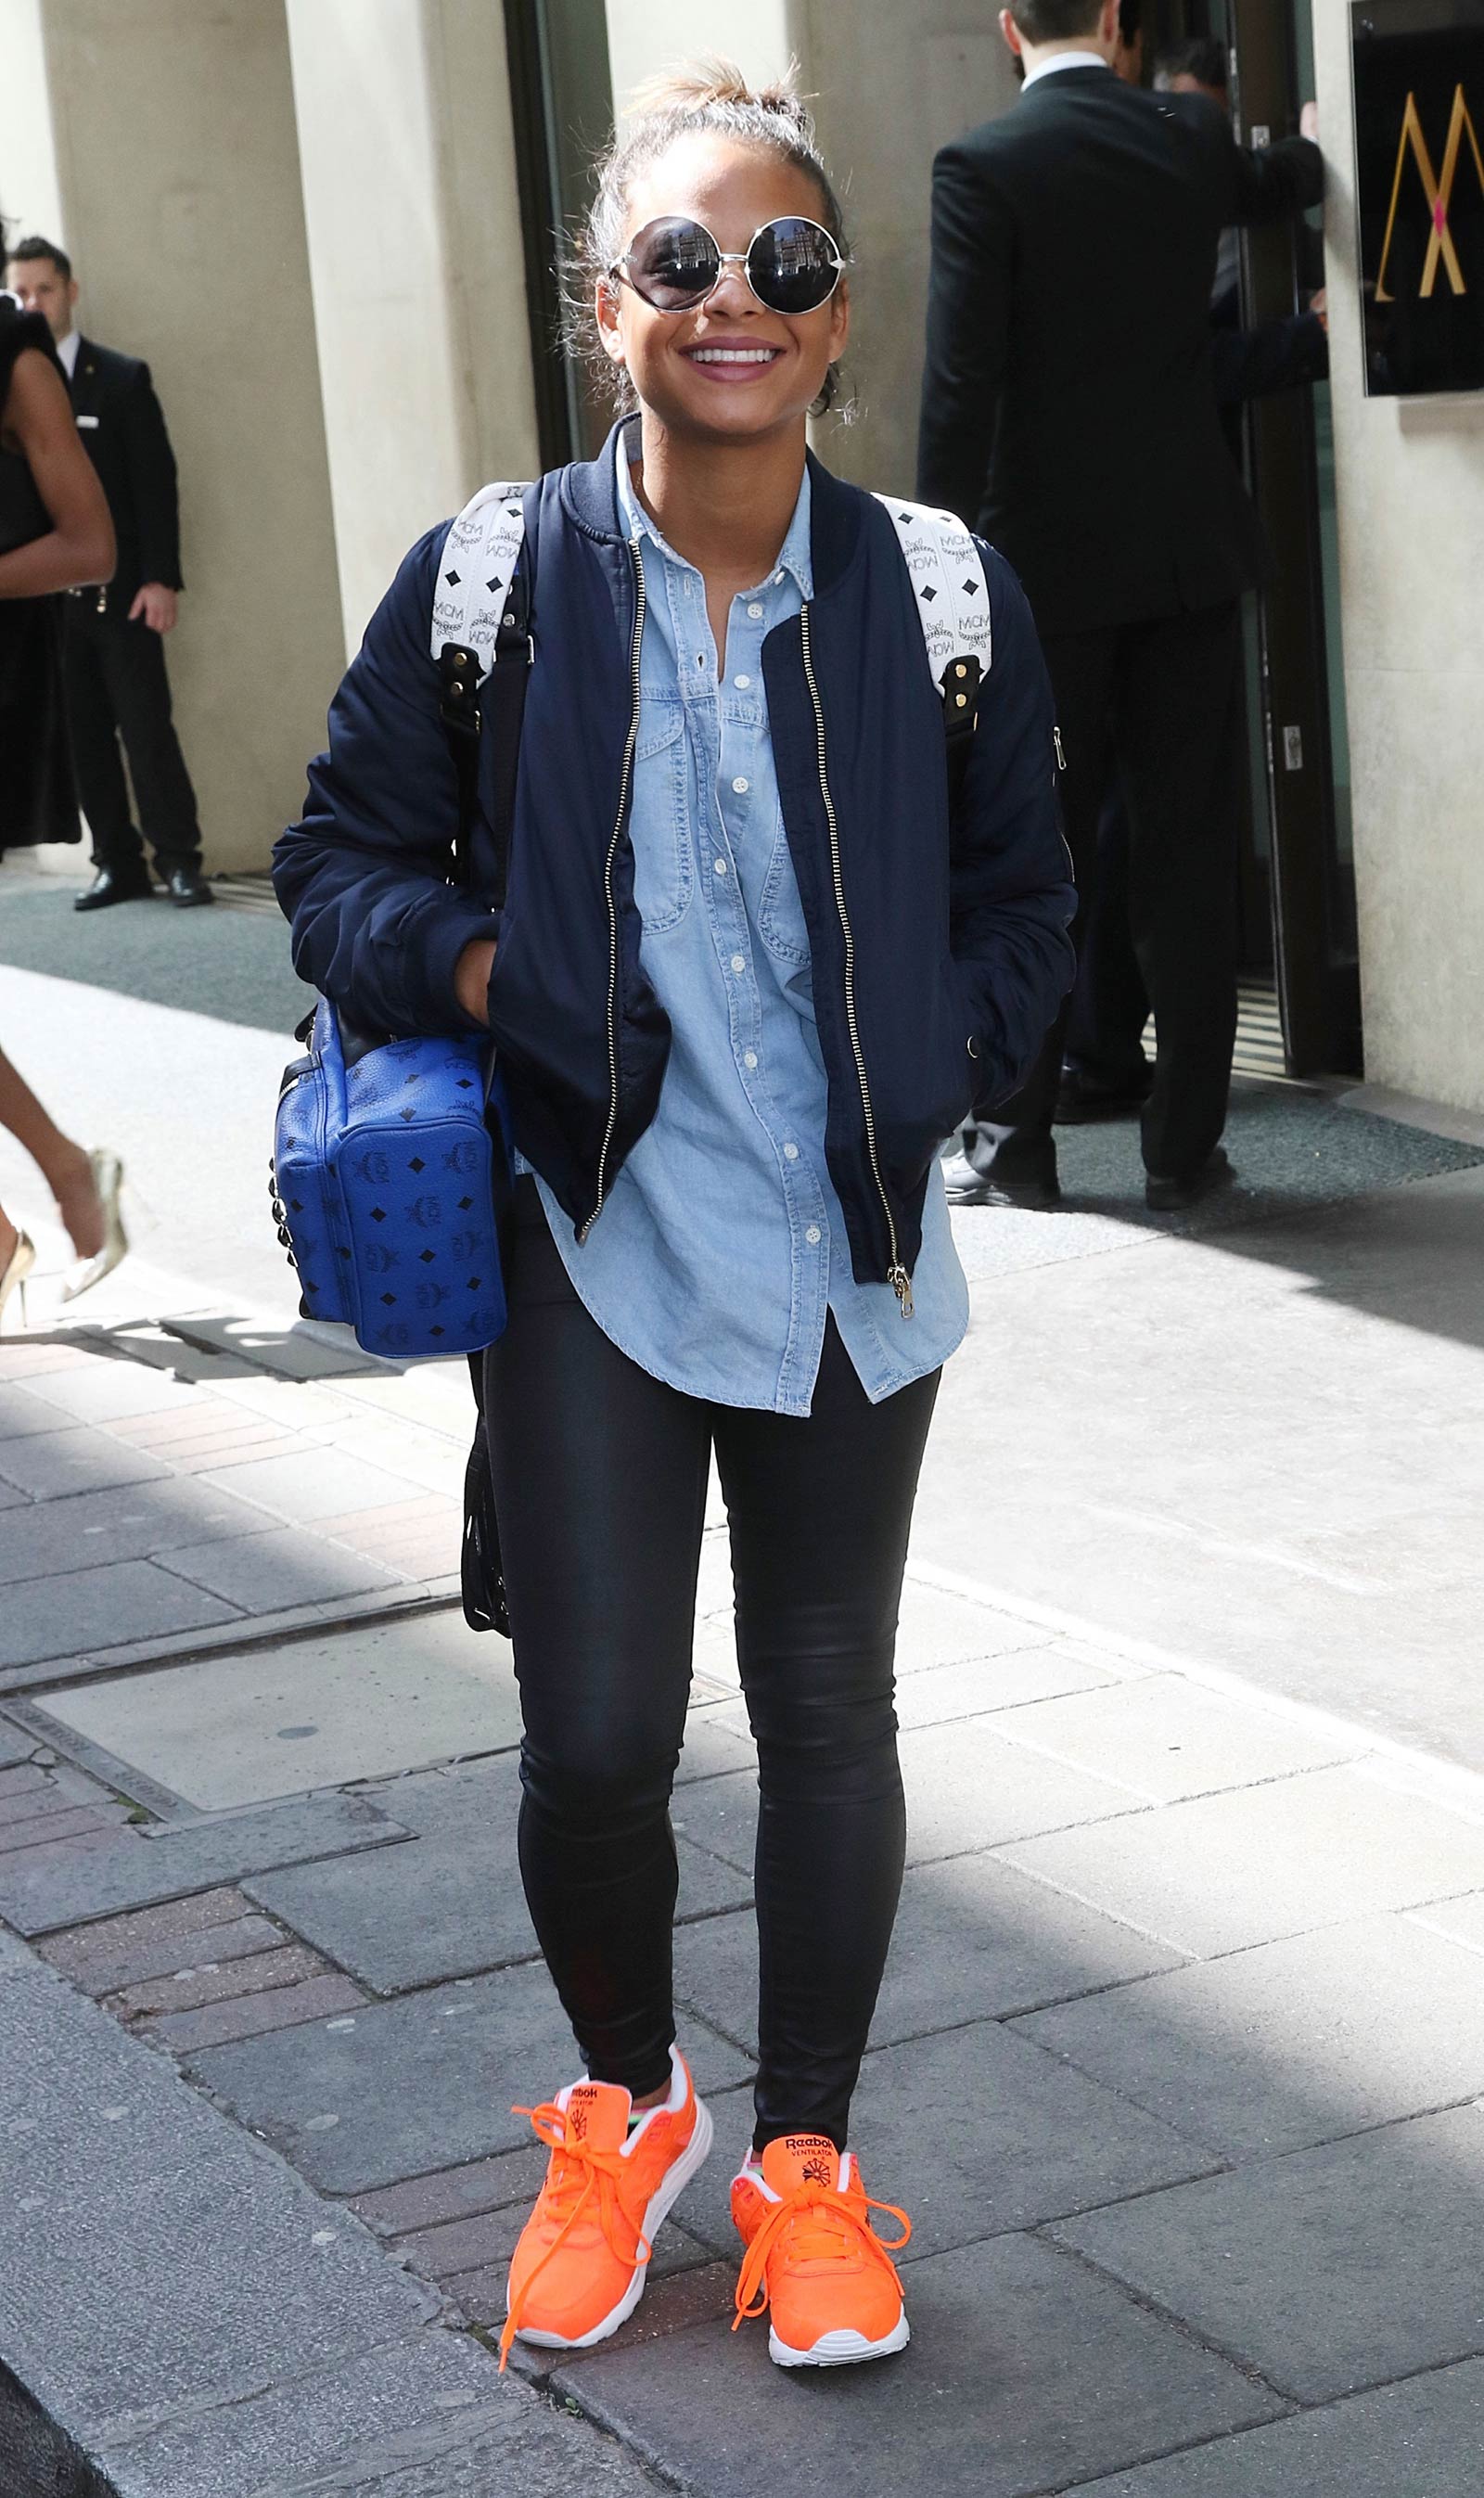 Christina Milian out and about in London